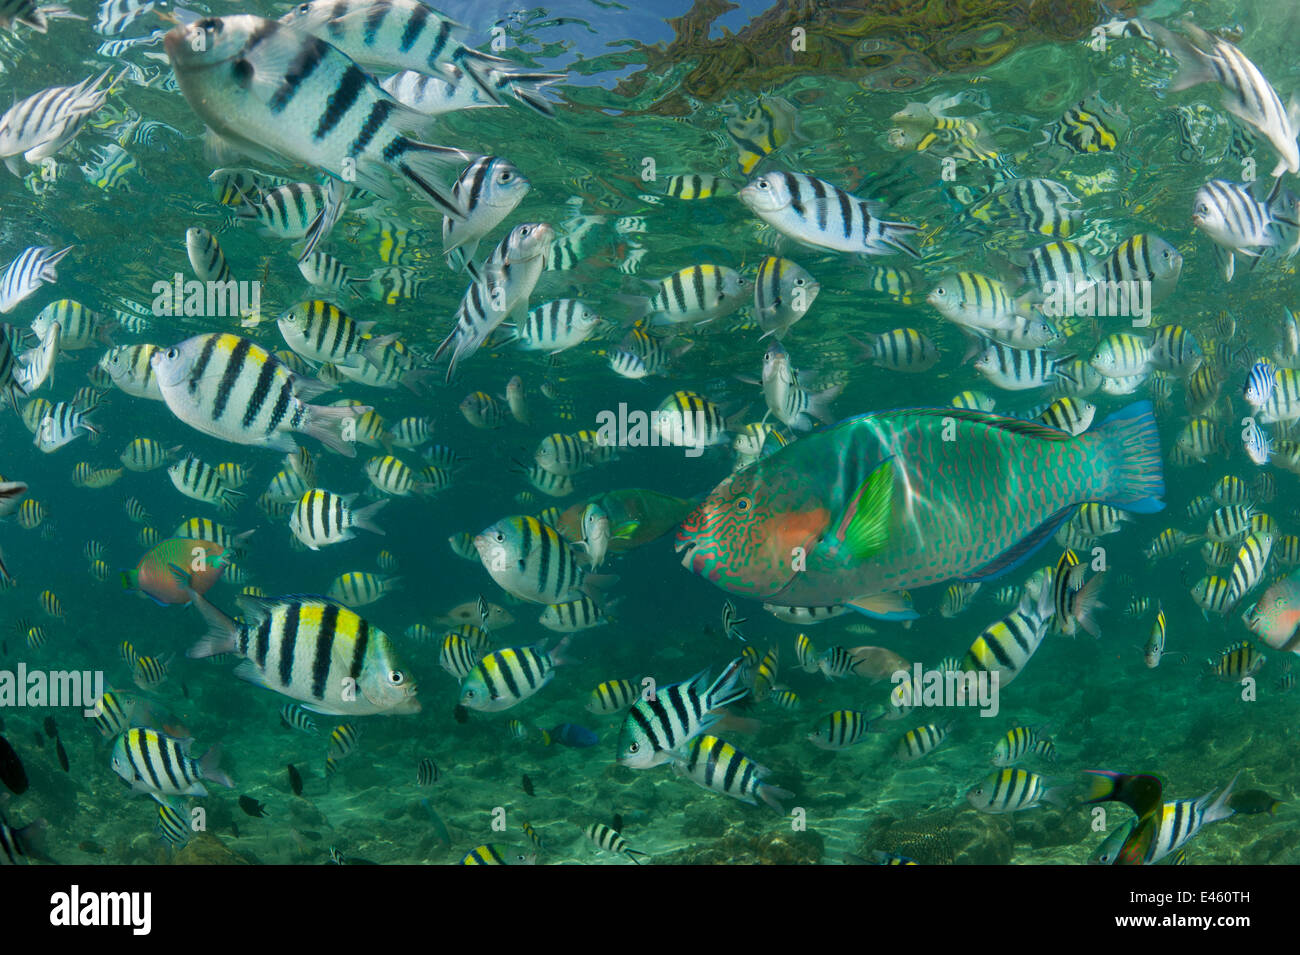 Sergeant major damselfish (Abudefduf vaigiensis), Parrotfish and Wrasses in the house reef of Miniloc Island Resort, El Nido, Palawan, Philippines. These fish come together densely when bread is thrown into the water by staff from the eco-resort. Stock Photo